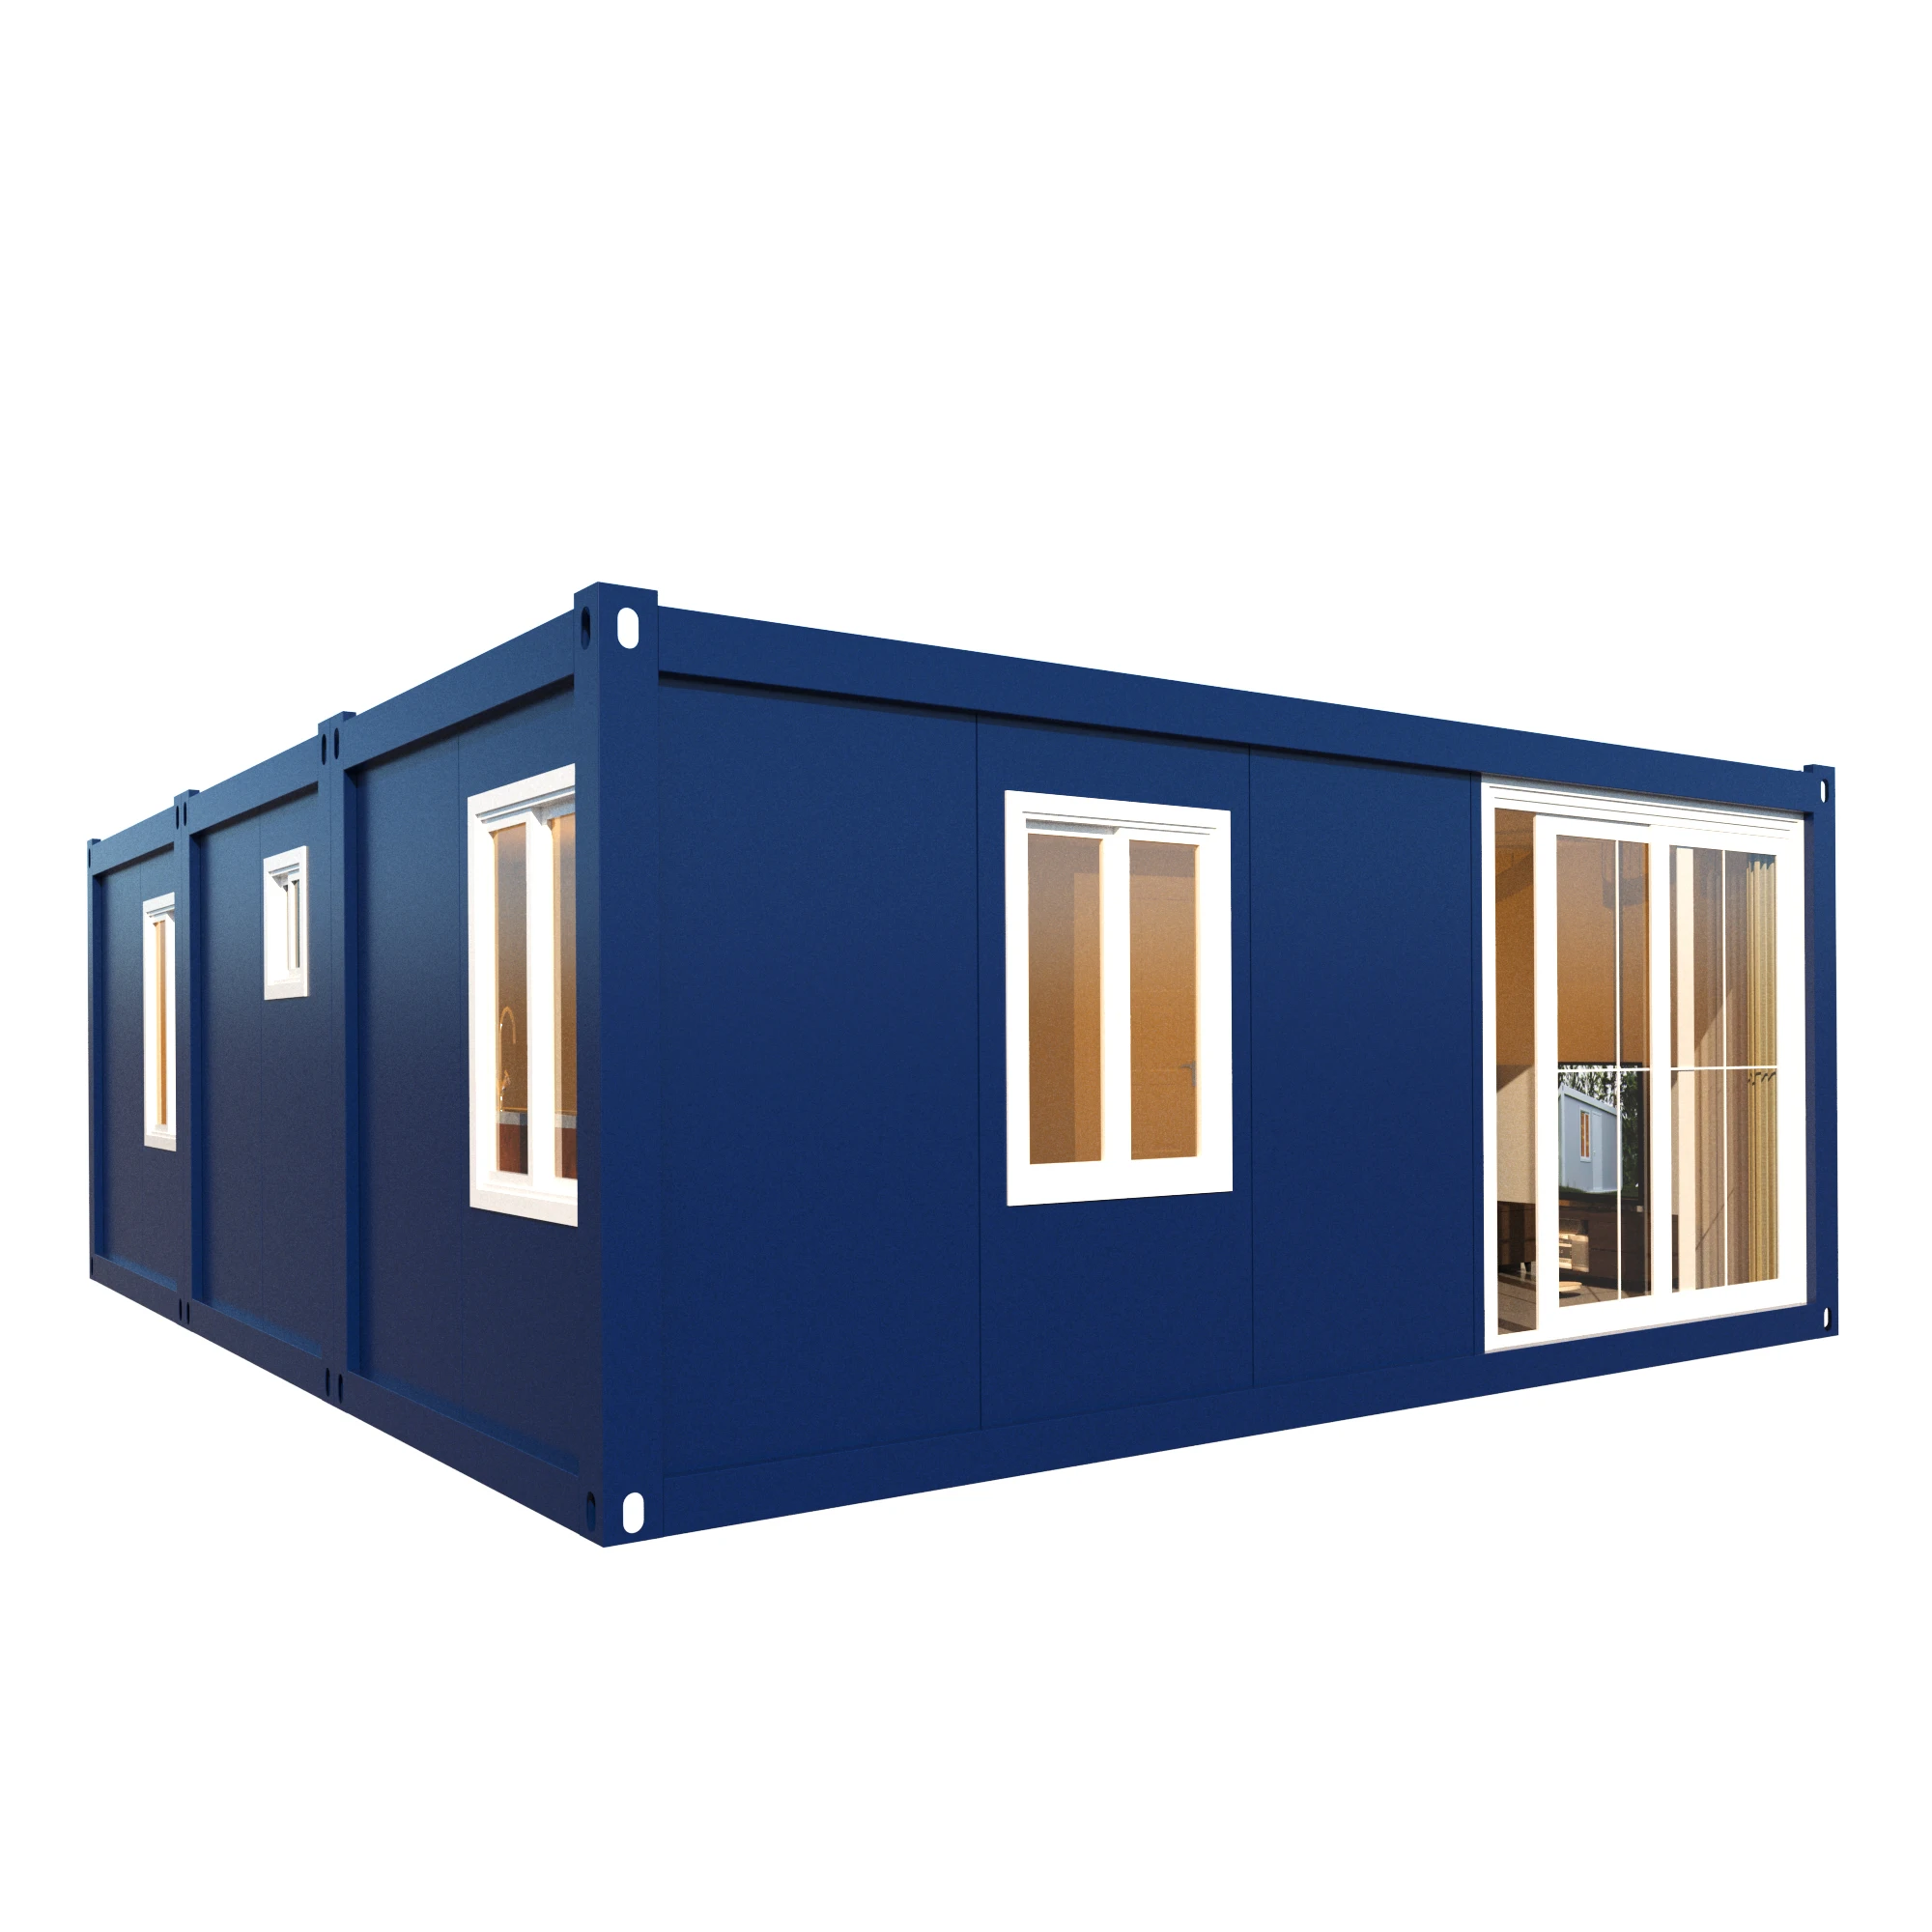 
lowes cheap modern tiny flat pack mobile 3 bedroom prefab modular small home containers casas house prefabricated  (60823424107)